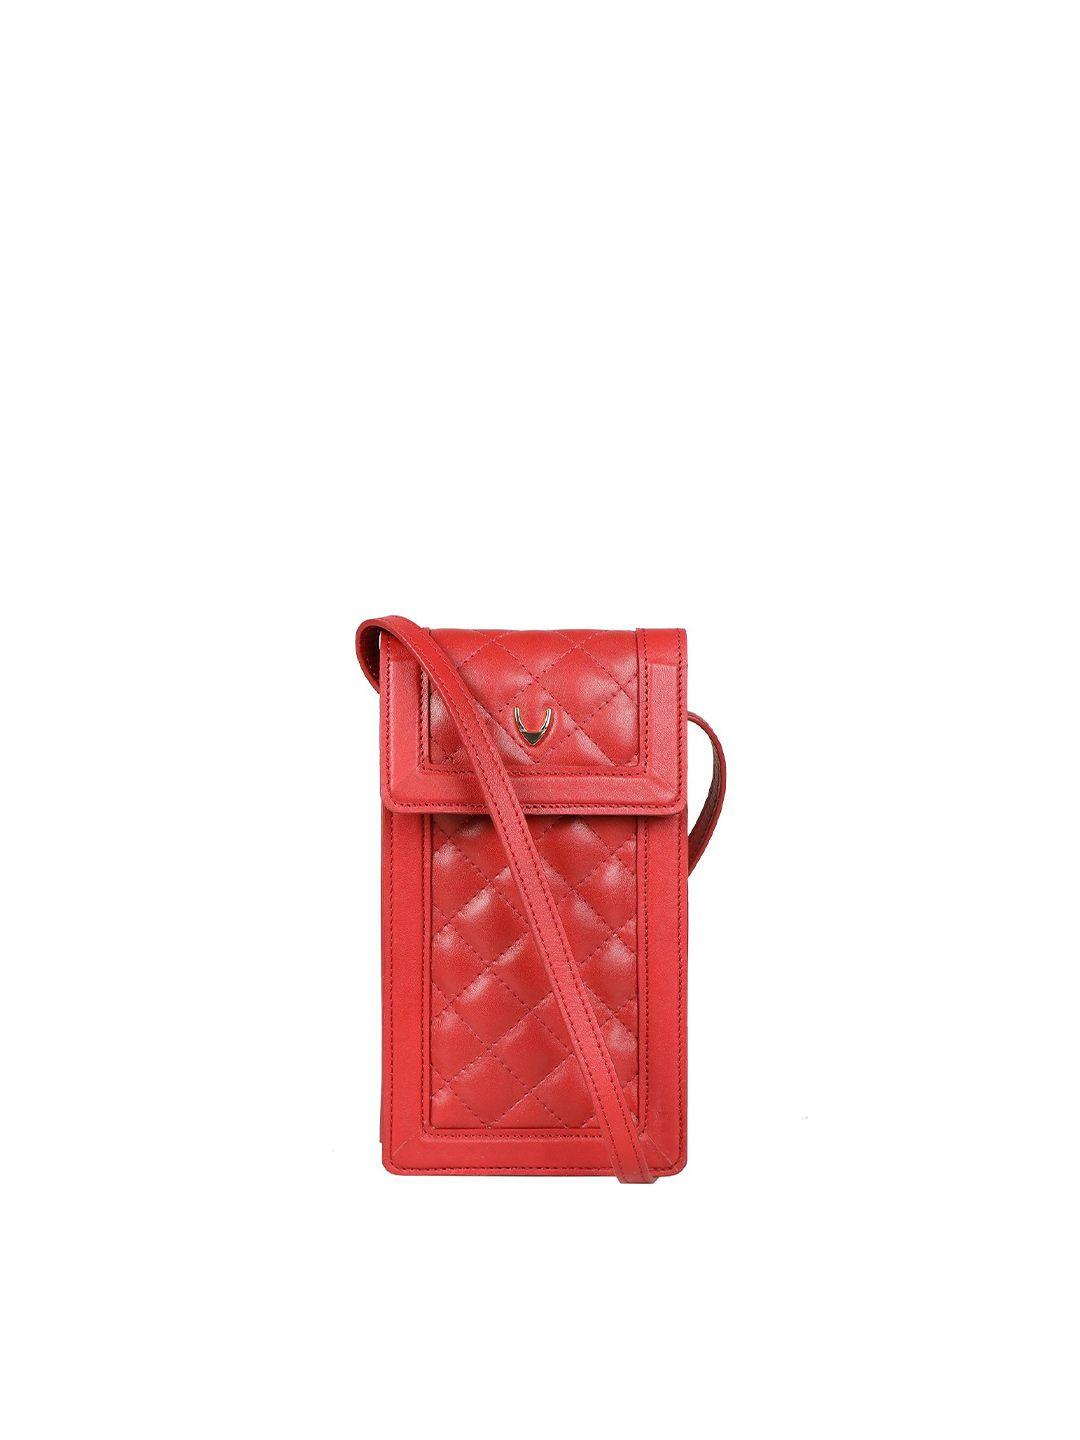 hidesign-red-textured-leather-purse-clutch